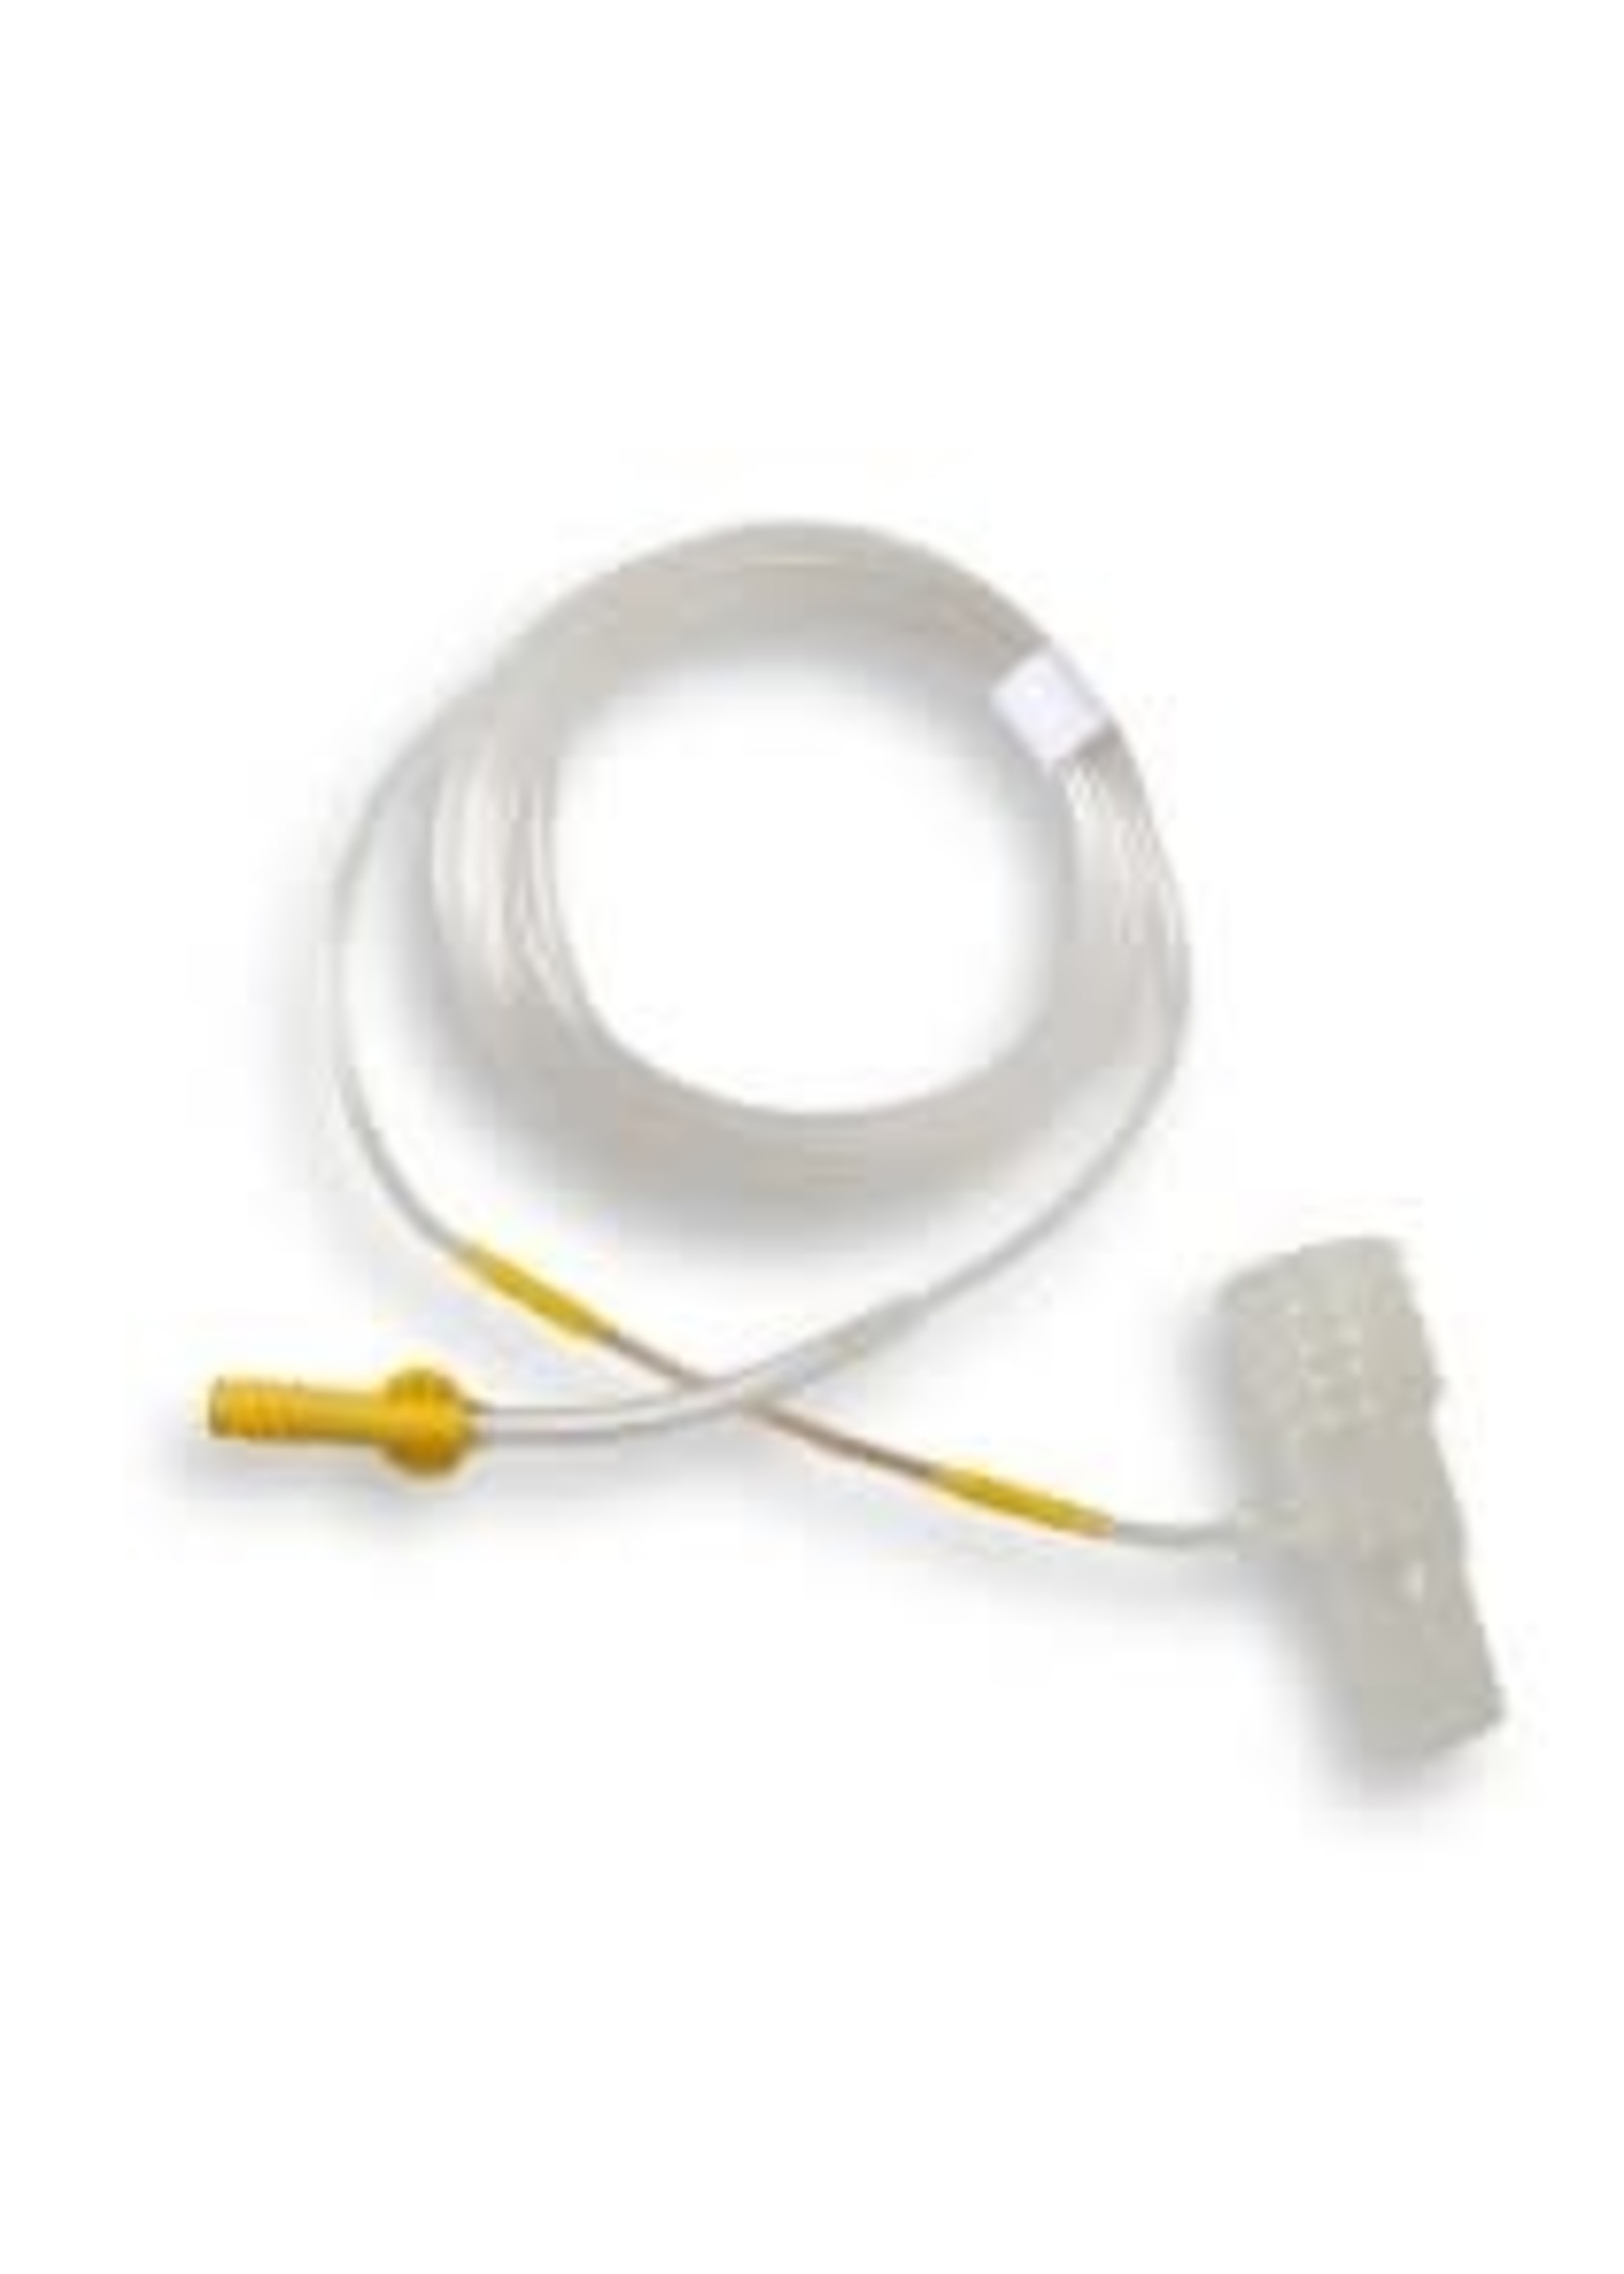 CO2 Detector - Adult or Ped